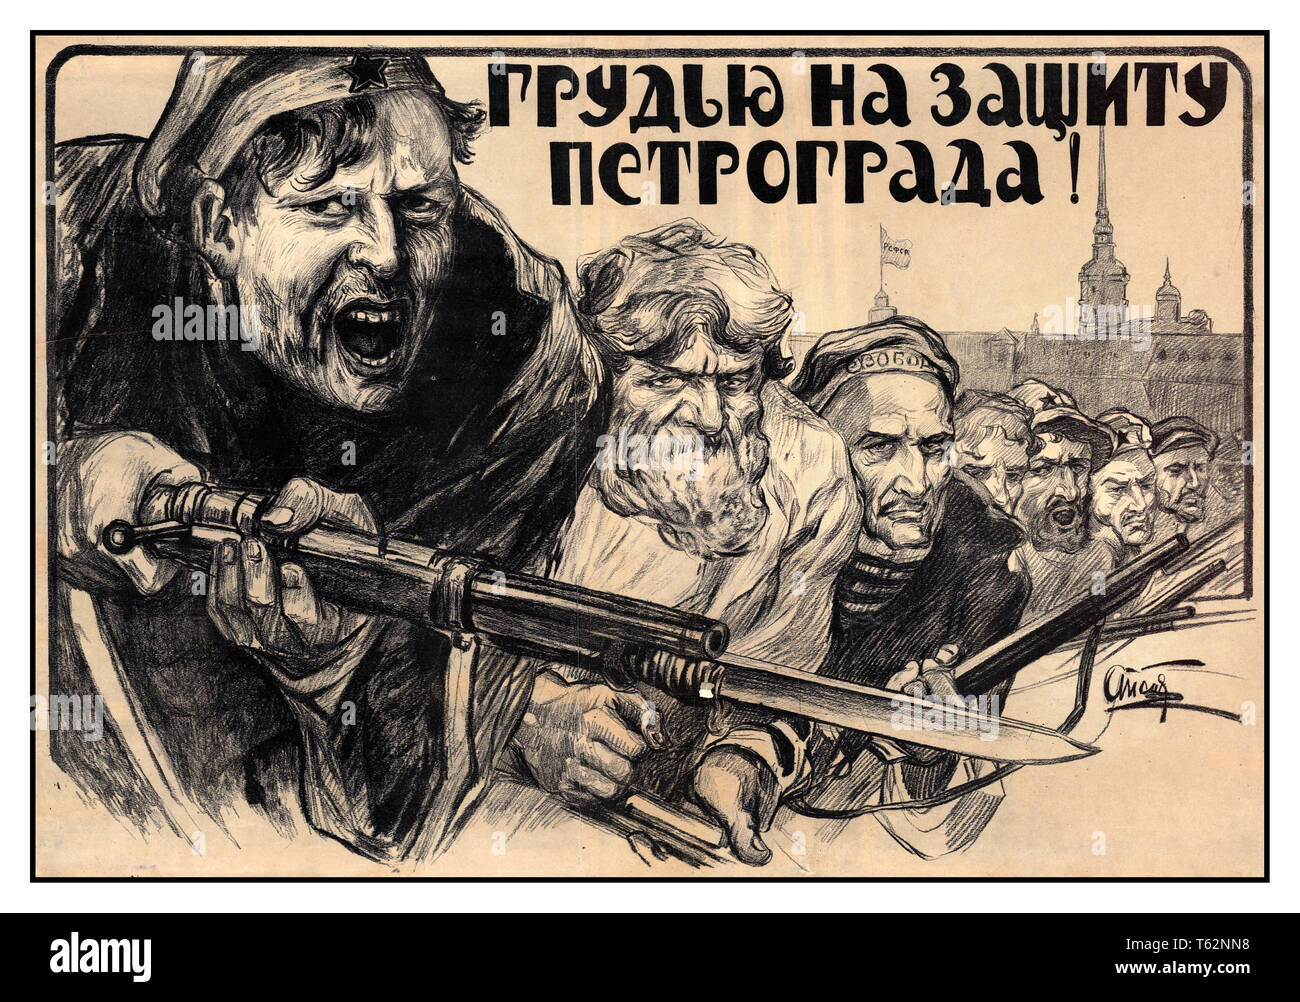 Vintage Russian Propaganda Poster 'Head and Shoulders to the defense of Petrograd!'. Moscow Political Department of the Revolutionary Military Department of the Republic  Date 1918 Russia 1918 to 1921. Russia by 1918 appeared to be in the hands of the communists (the Bolshevik Party) led by Lenin. ... All the groups that opposed Lenin were called the Whites. A civil war broke out in Russia with the Whites fighting to get rid of the Reds – the Communists. Stock Photo